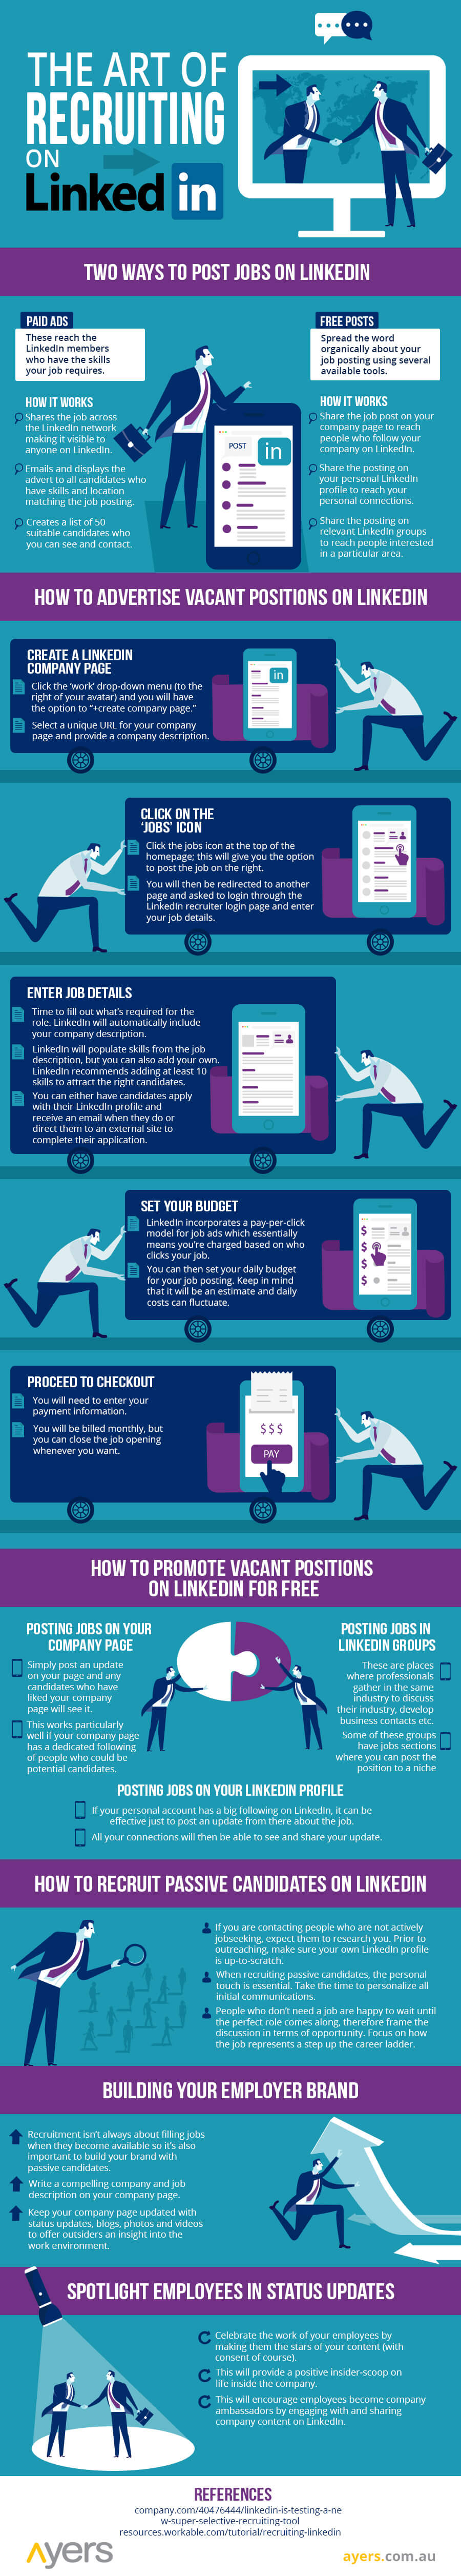 Mastering the Art of Recruiting on LinkedIn (Infographic)